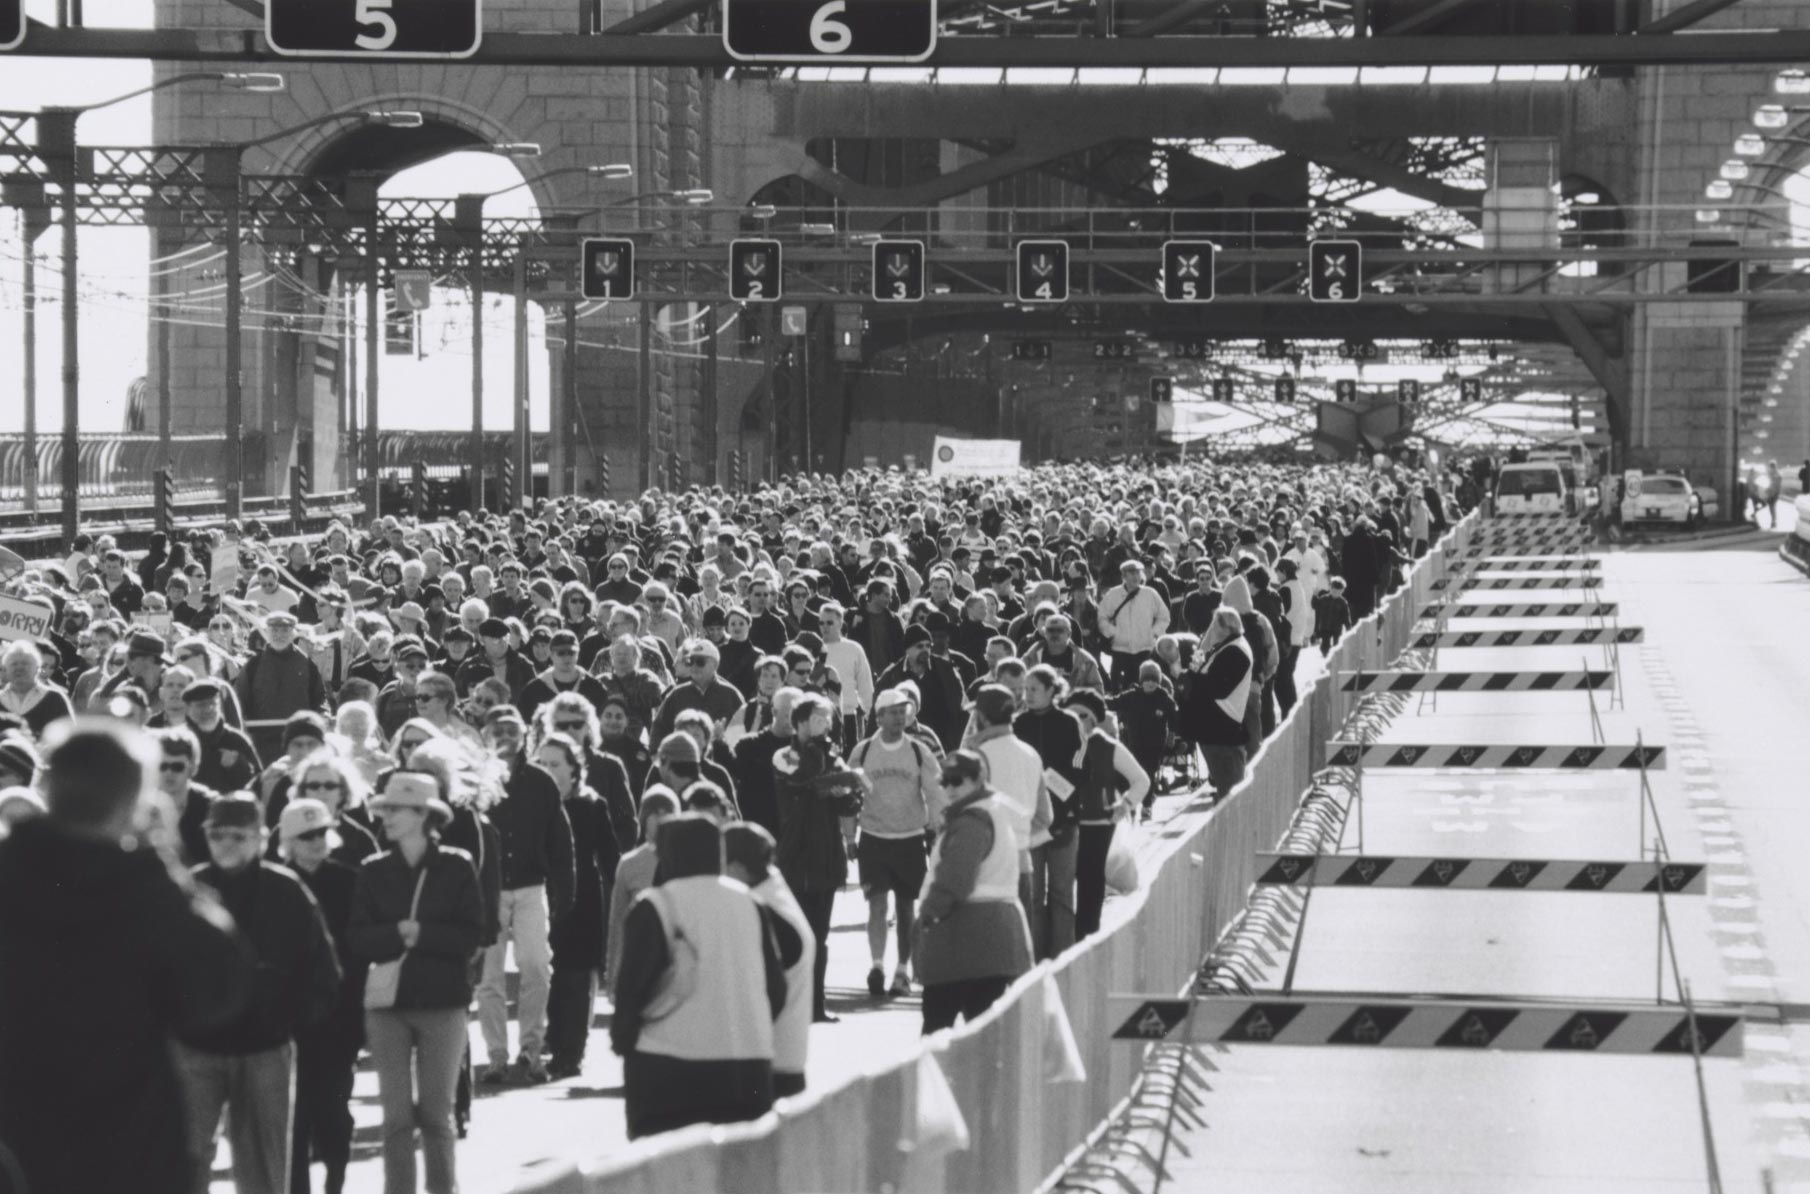 Crowd on the Sydney Harbour Bridge during the Walk for Reconciliation, 2000.